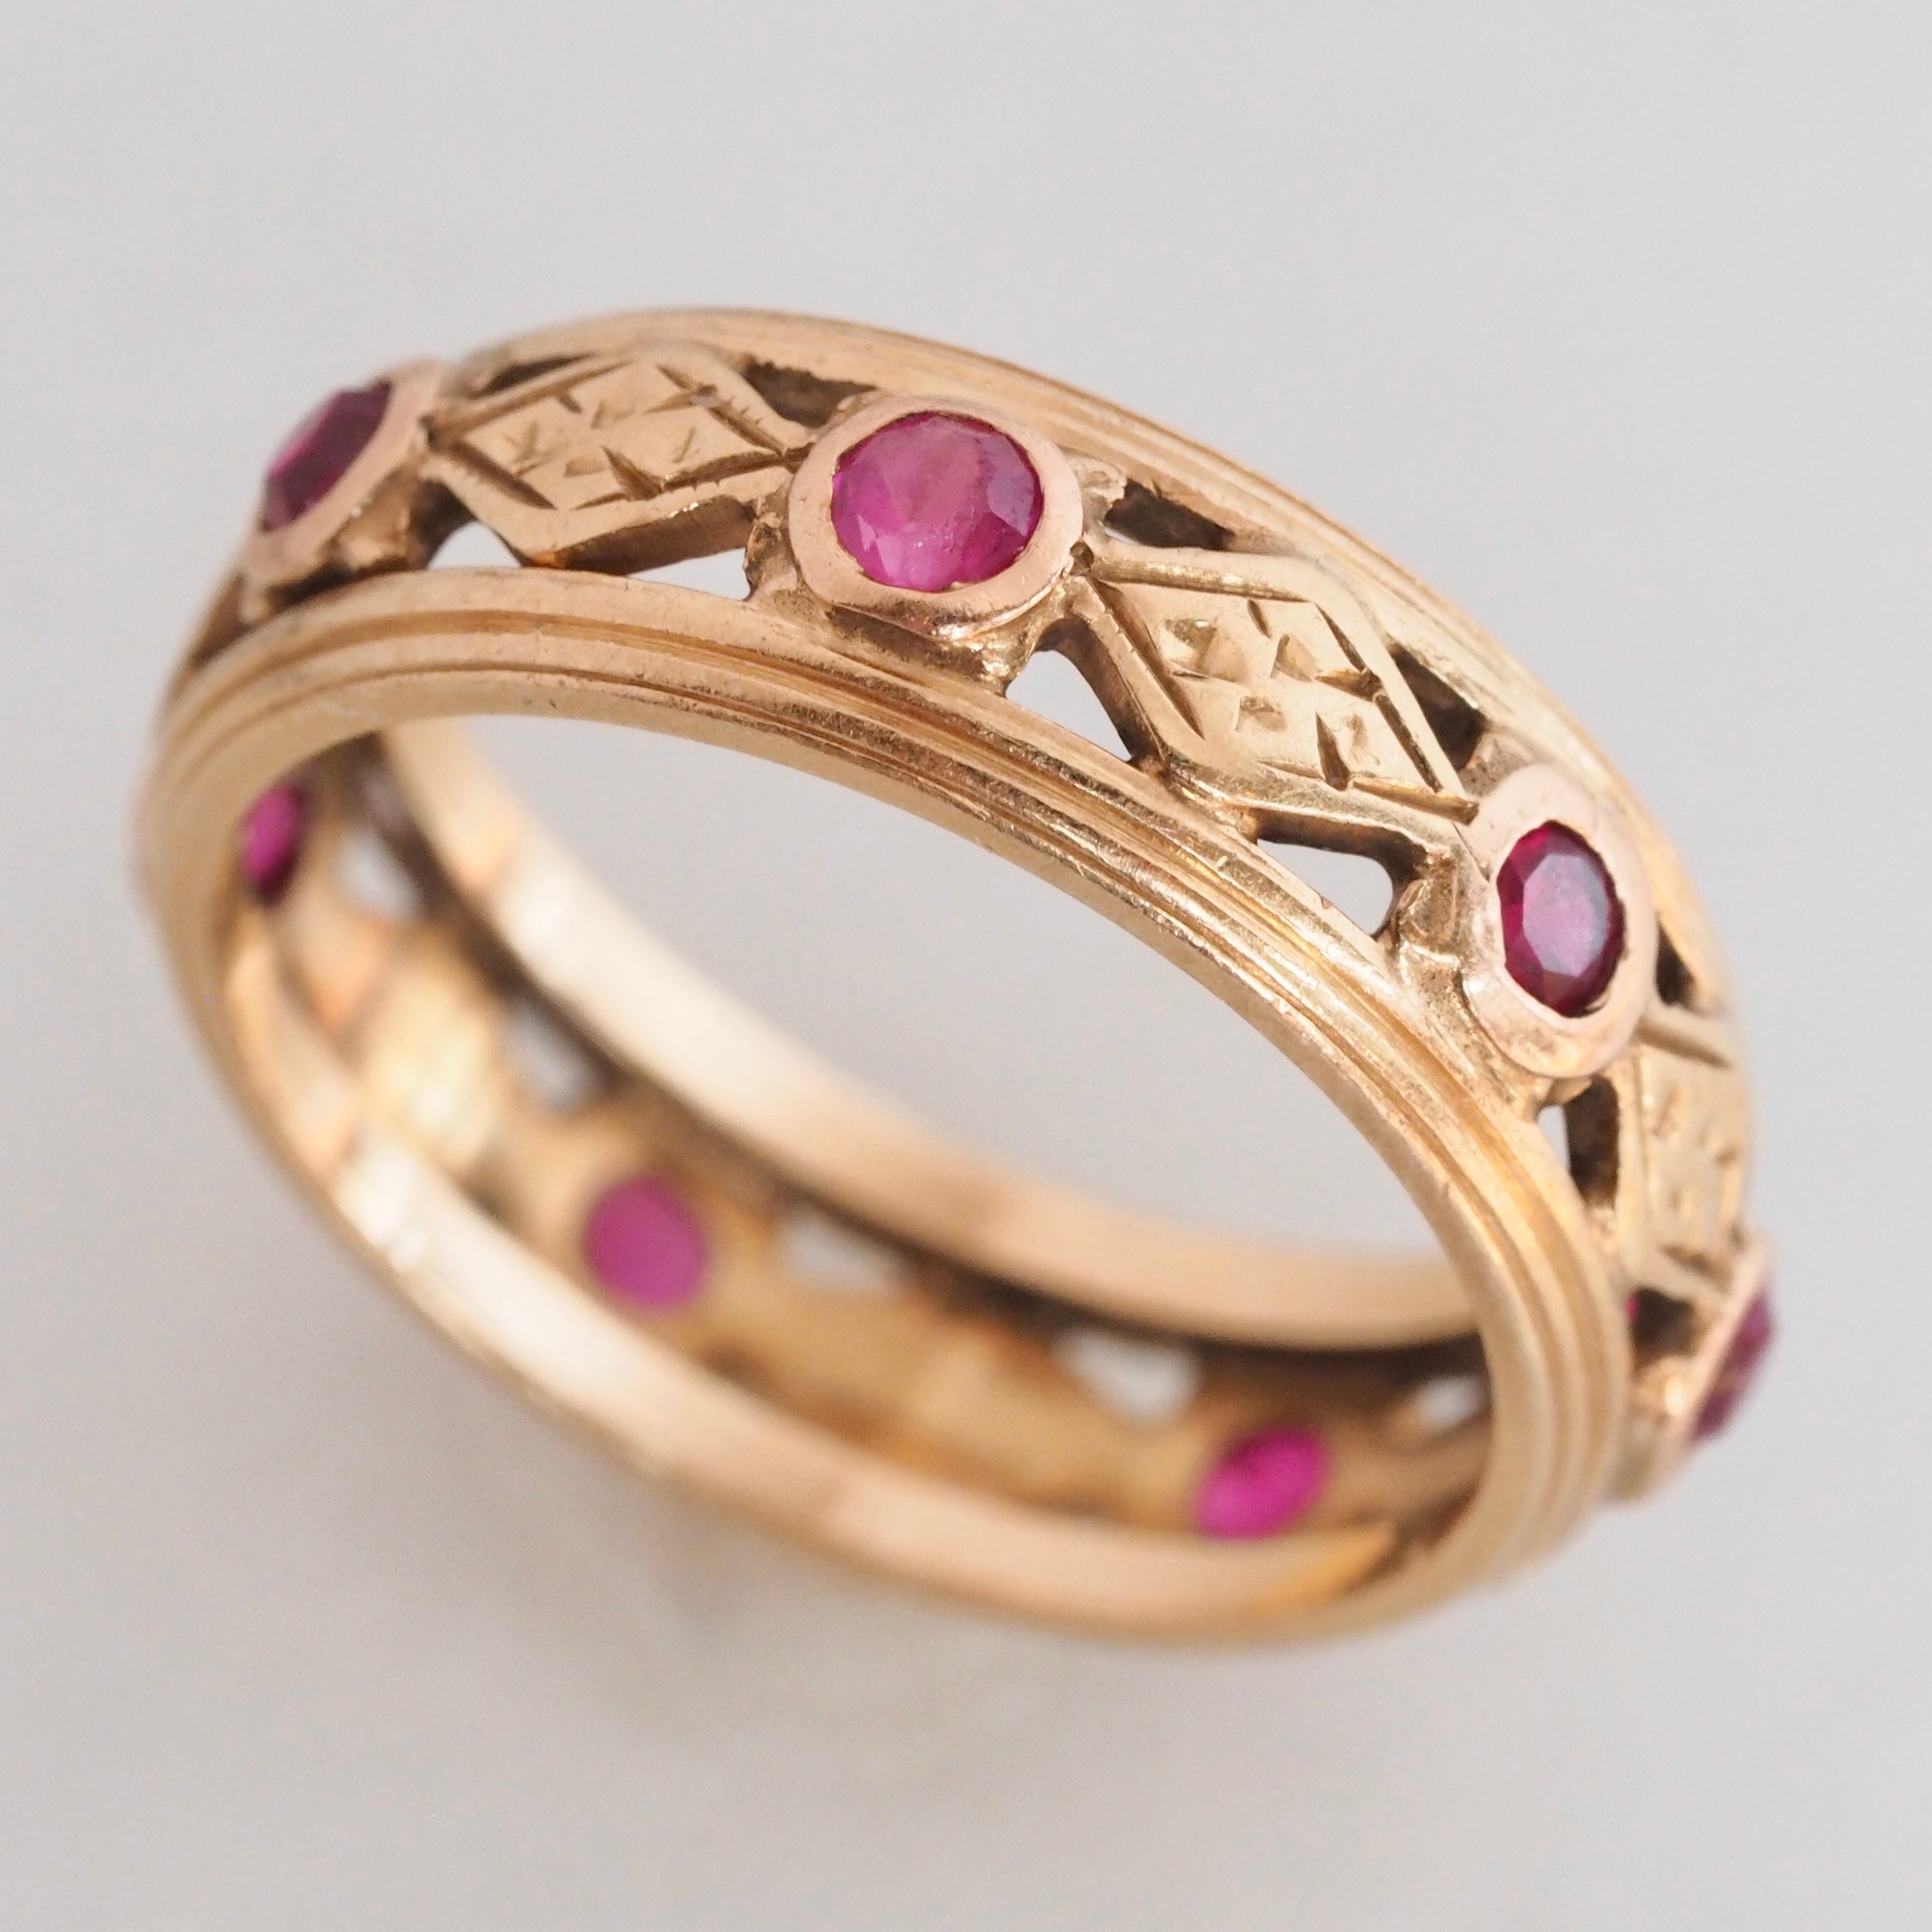 Antique 14k Gold Ruby Engraved Kite Cutout Band